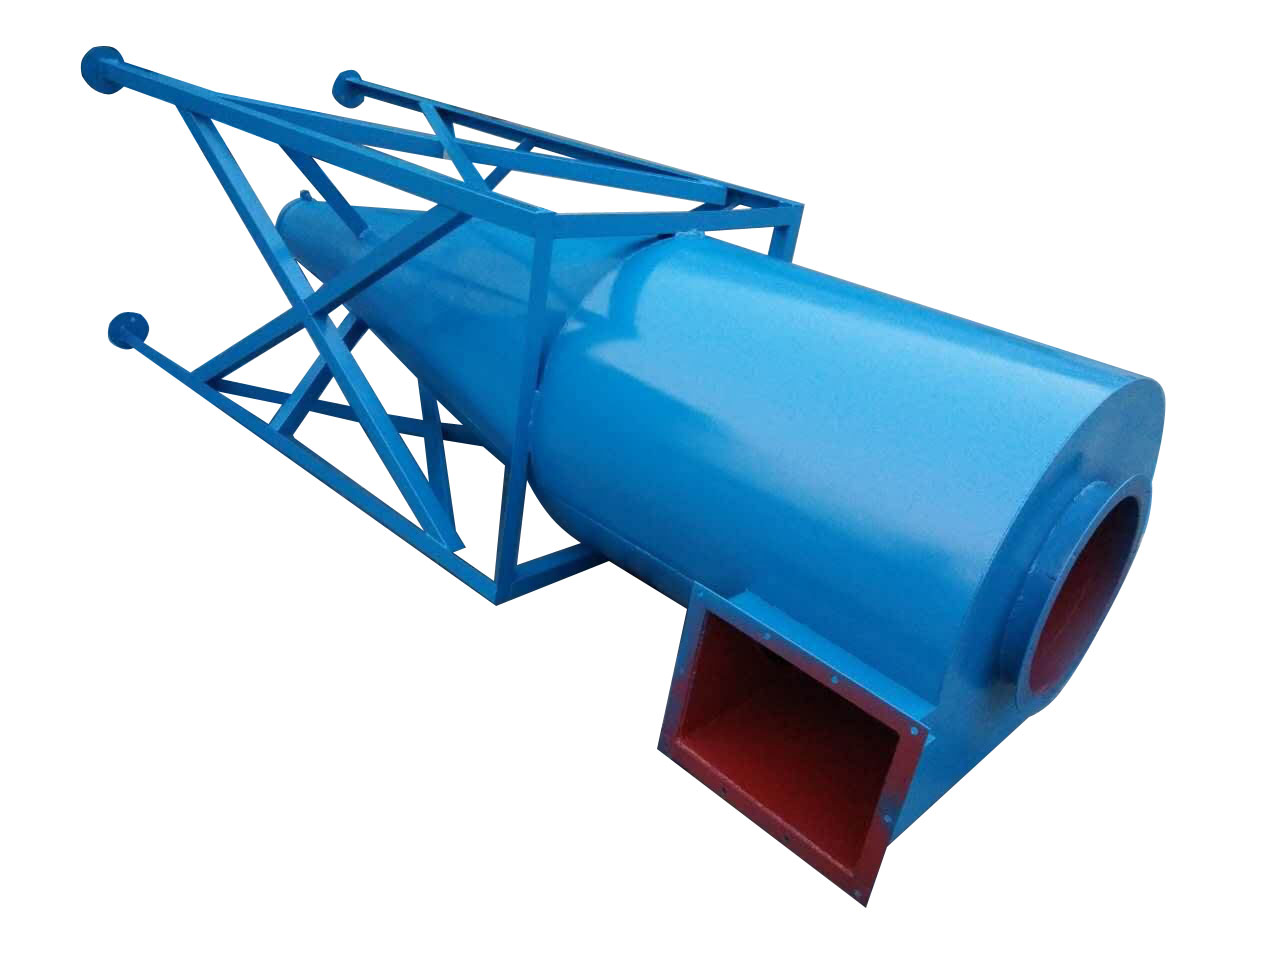 CLP-B cyclone dust collector